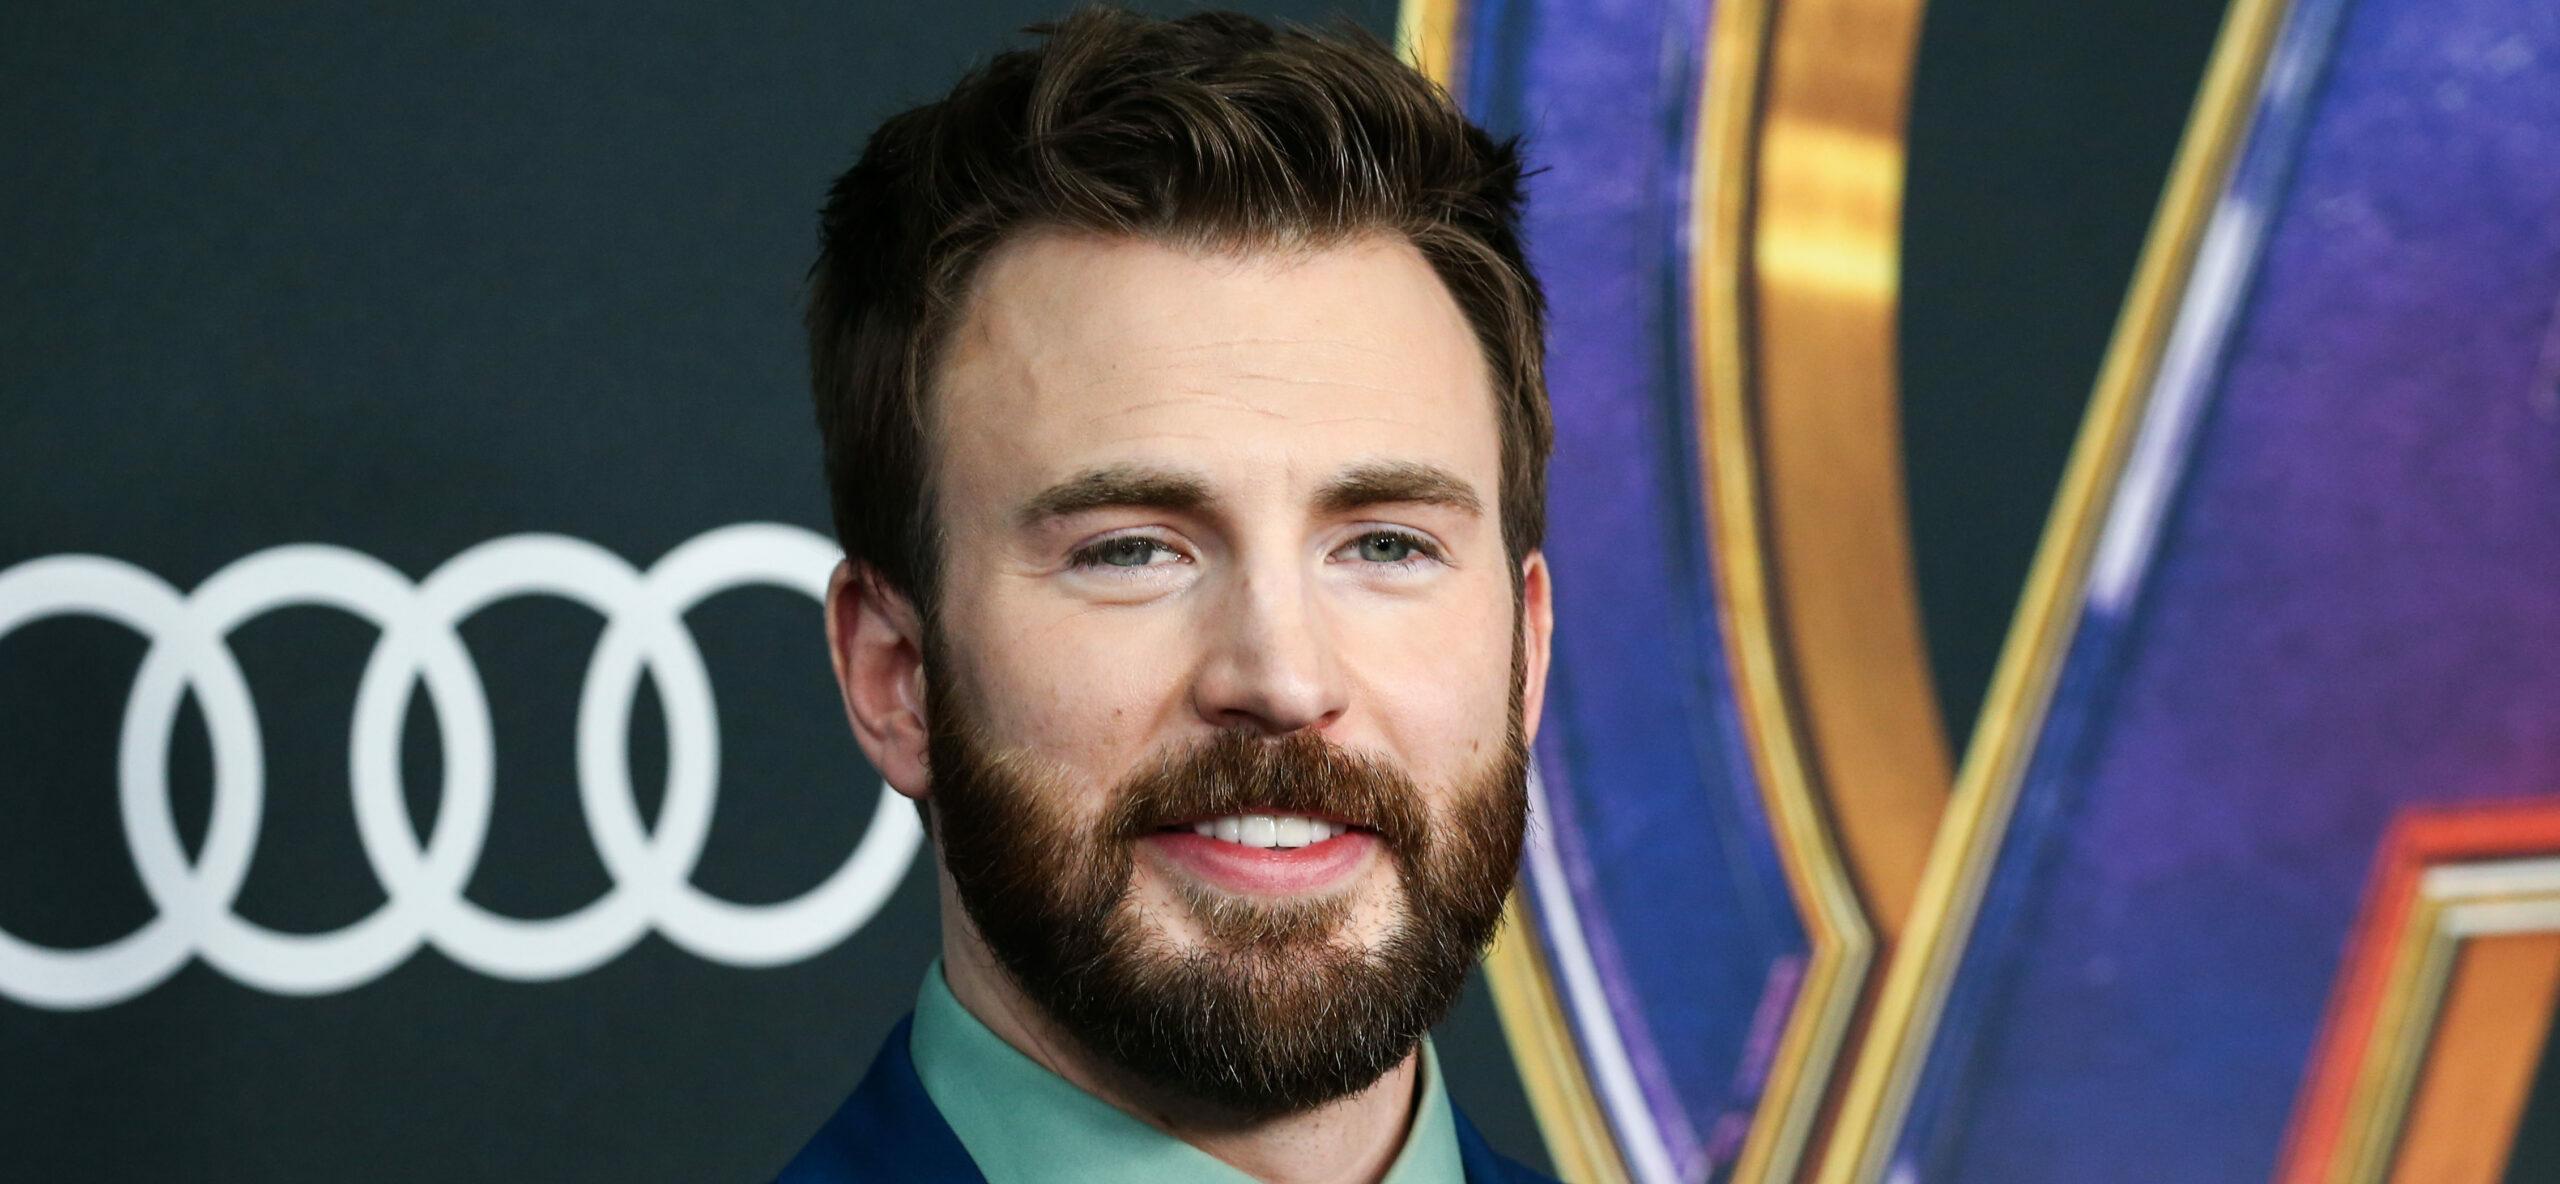 Chris Evans looks amazing in this blue suit paired with green T-shirt and black tie.